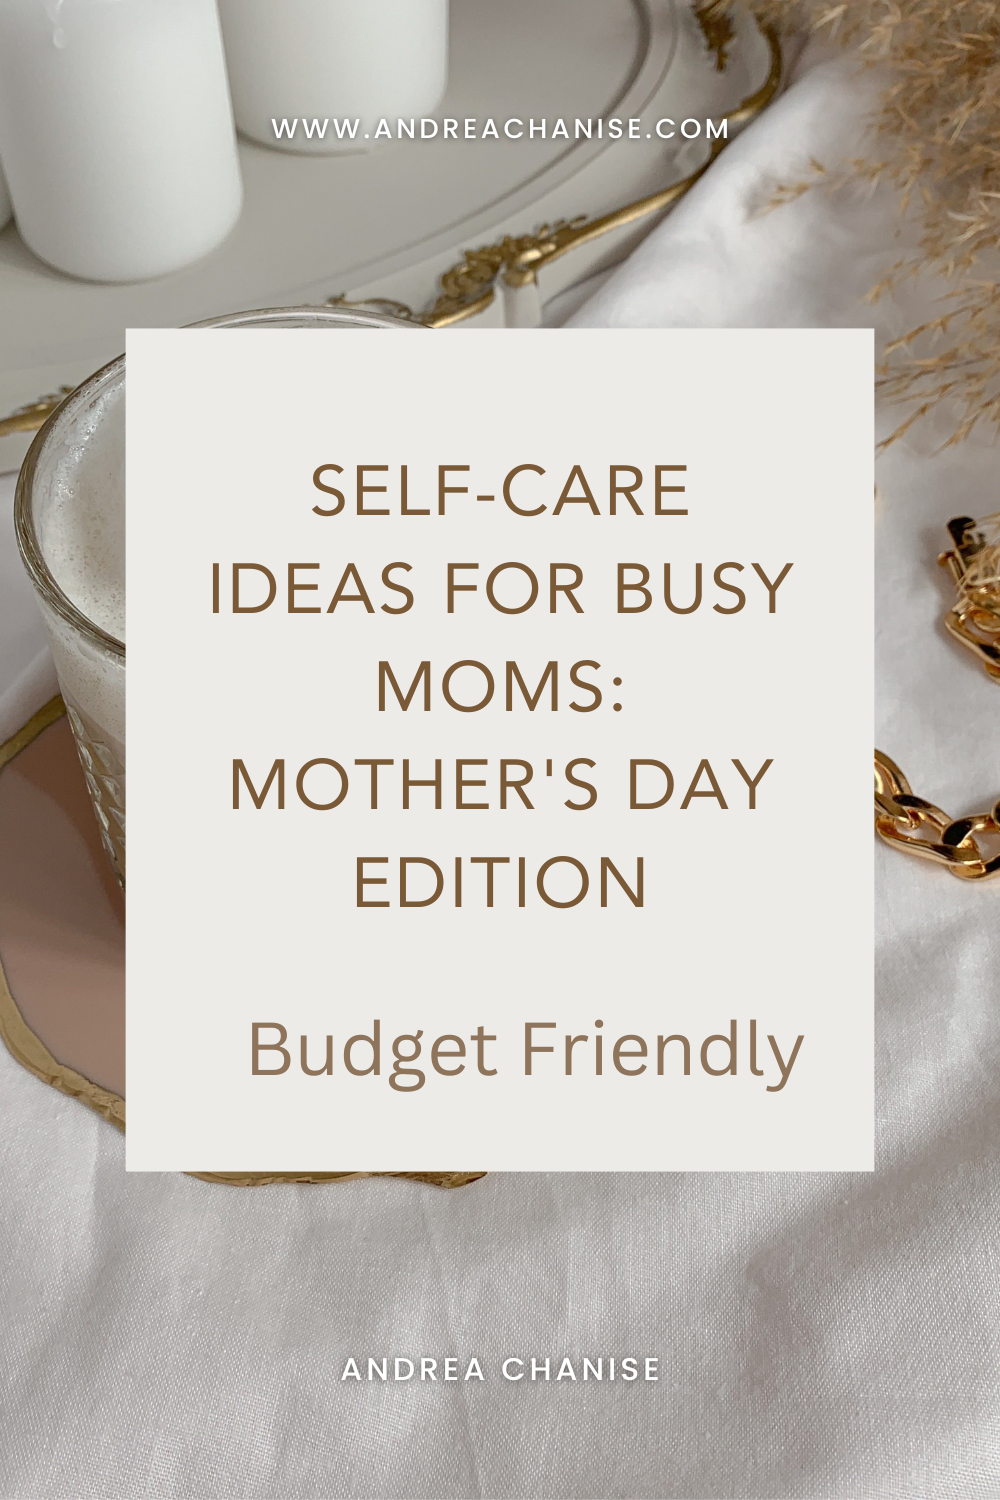 self-care ideas for busy moms: Mother's Day edition